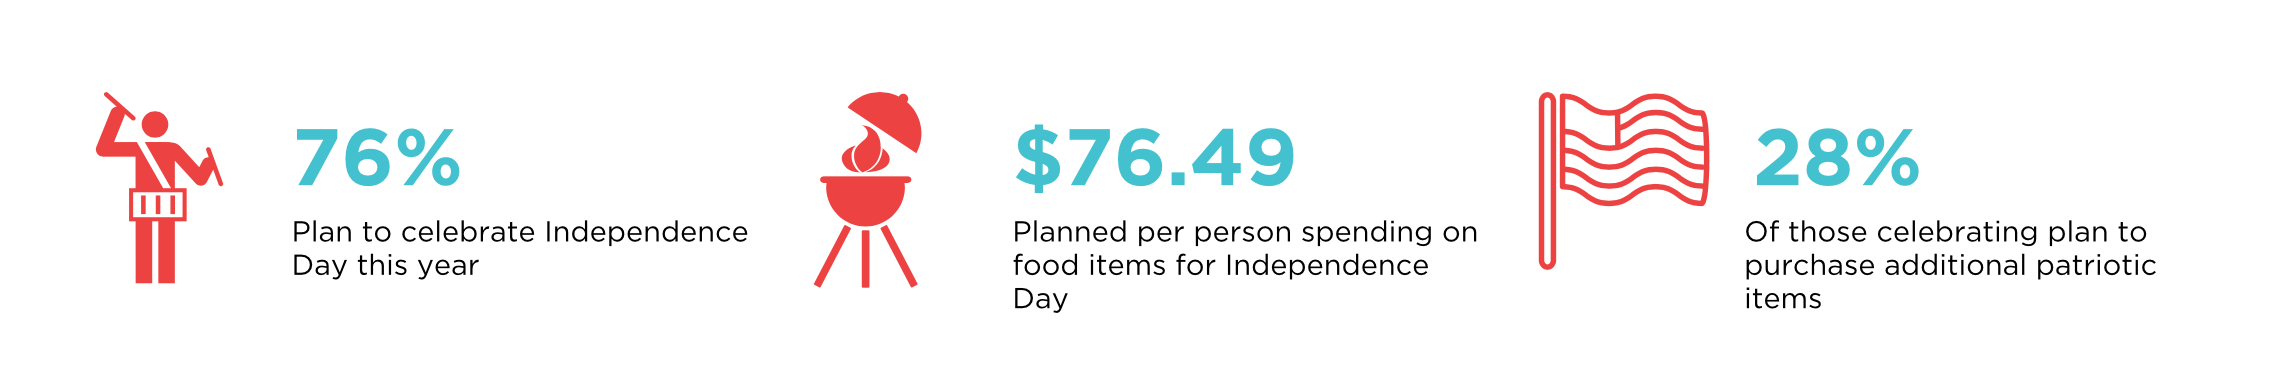 Independence Day sales statistics